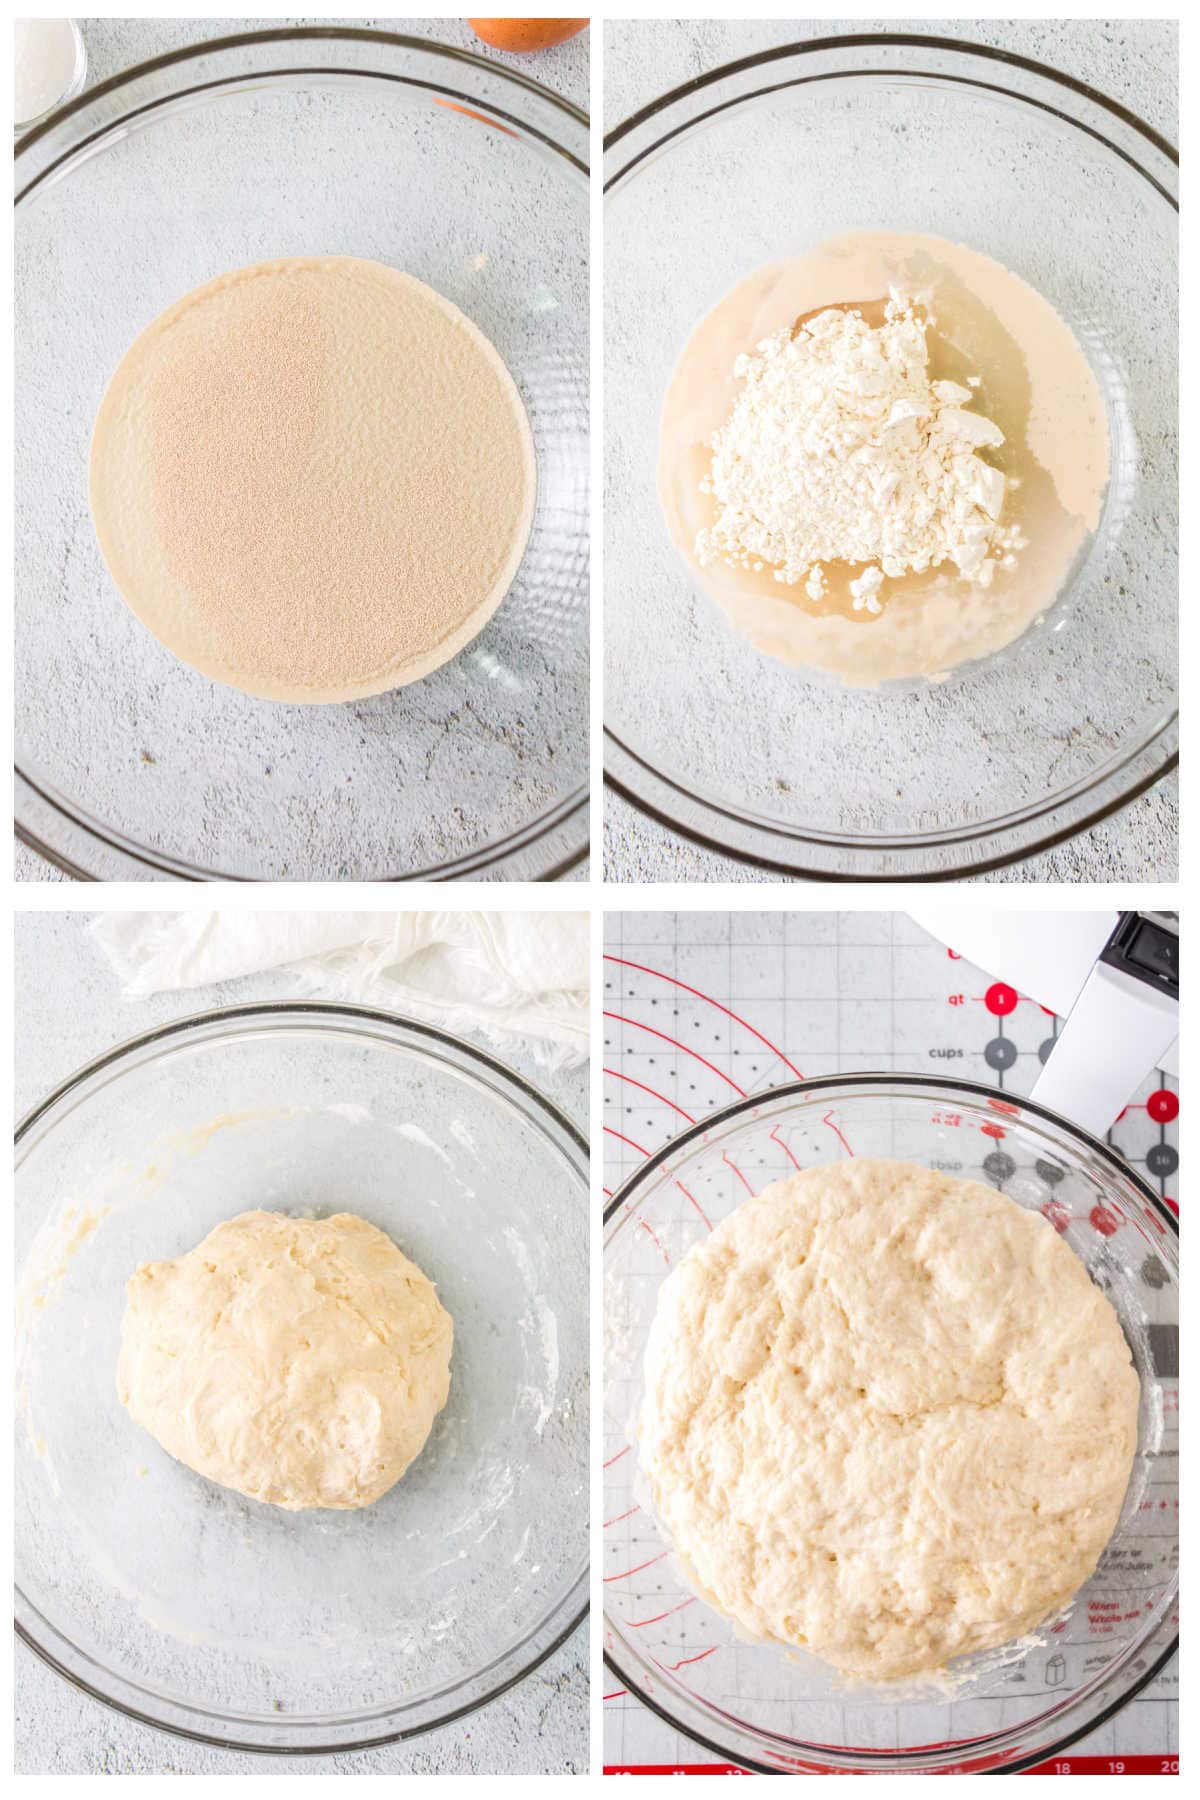 Step by step images showing how to make air fryer dinner rolls.